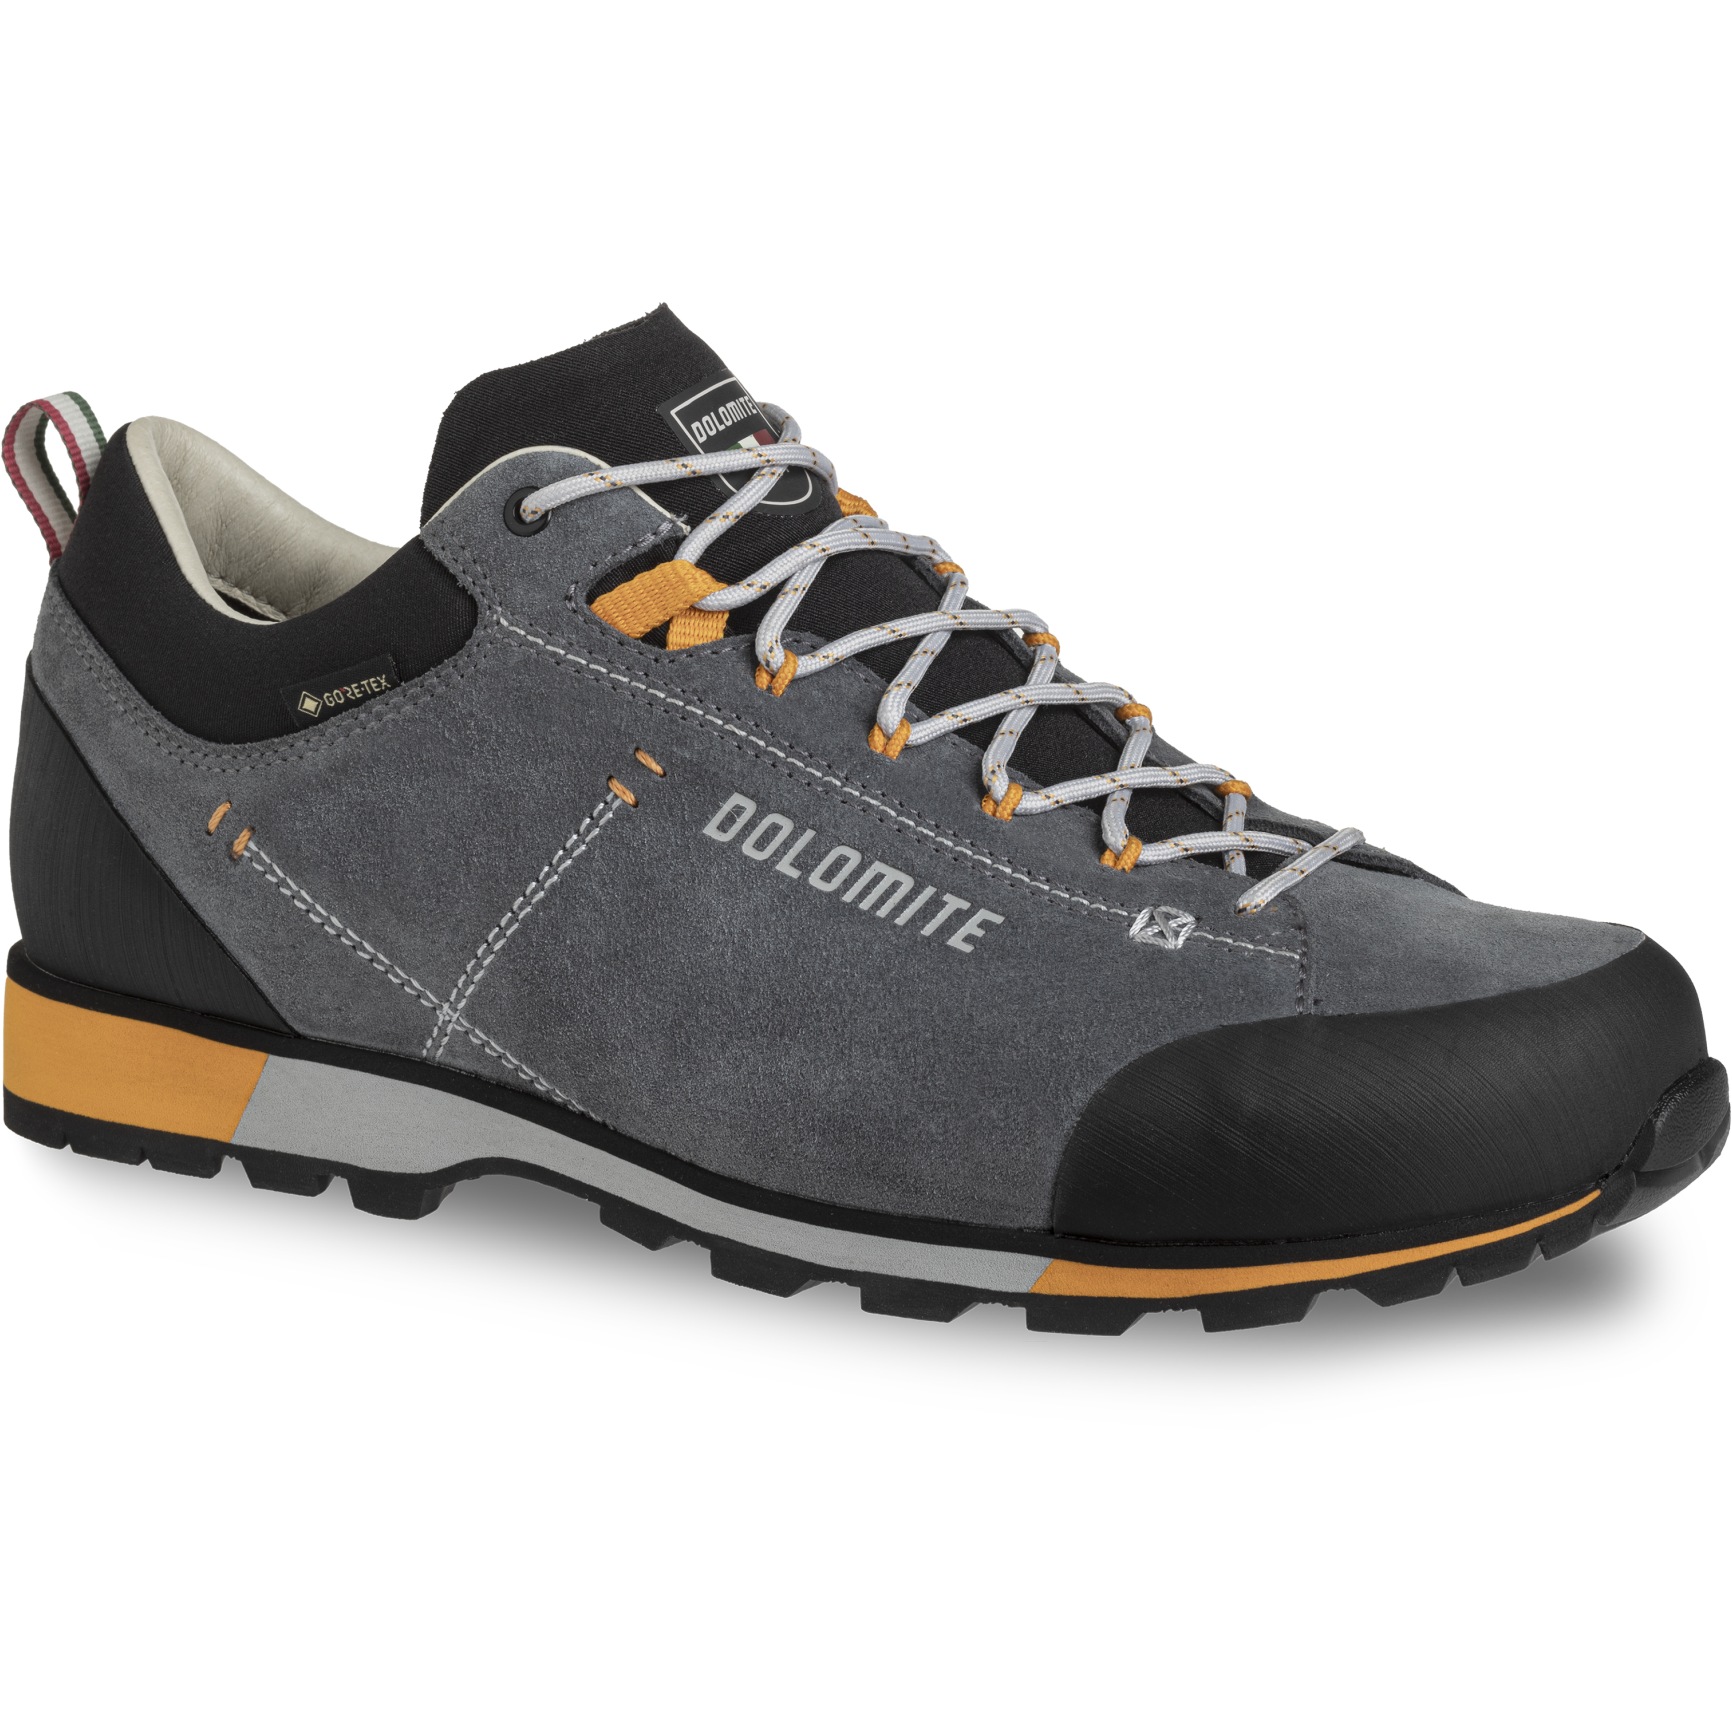 Picture of Dolomite 54 Hike Low Evo GTX Hiking Shoes - gunmetal grey